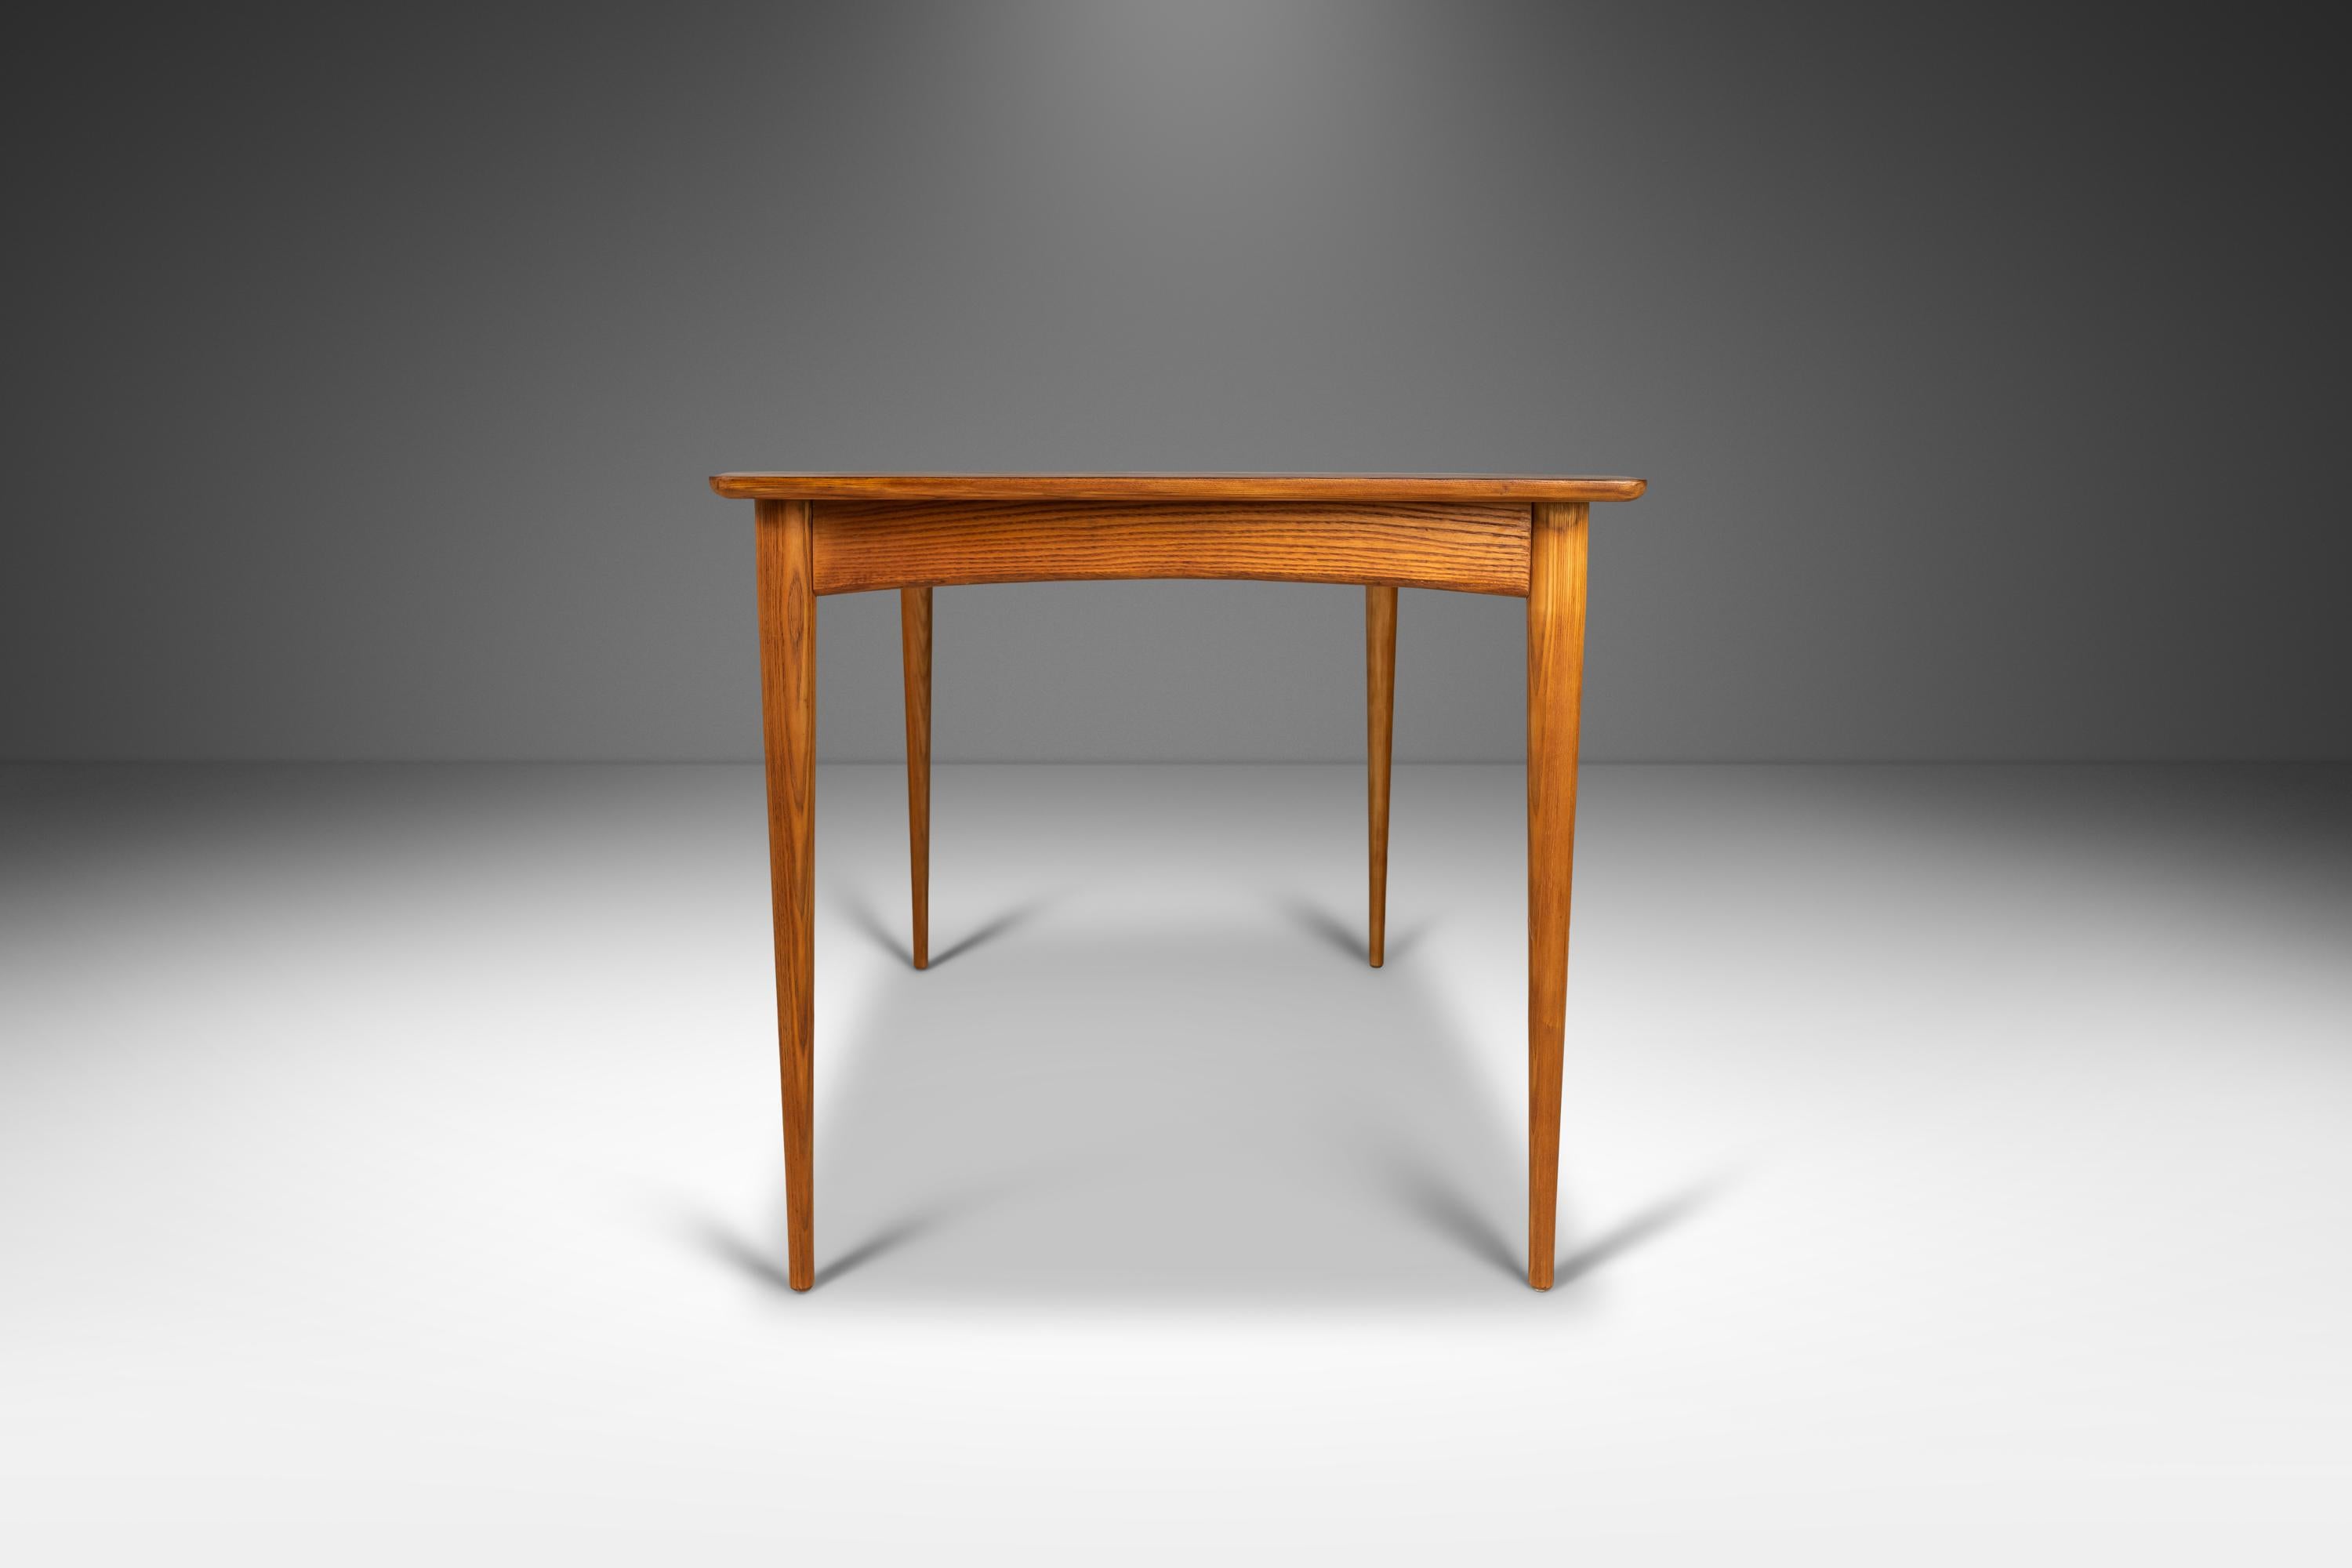 Angular Mid-Century Modern Extension Dining Table in Solid Oak, Usa, circa 1960s For Sale 1